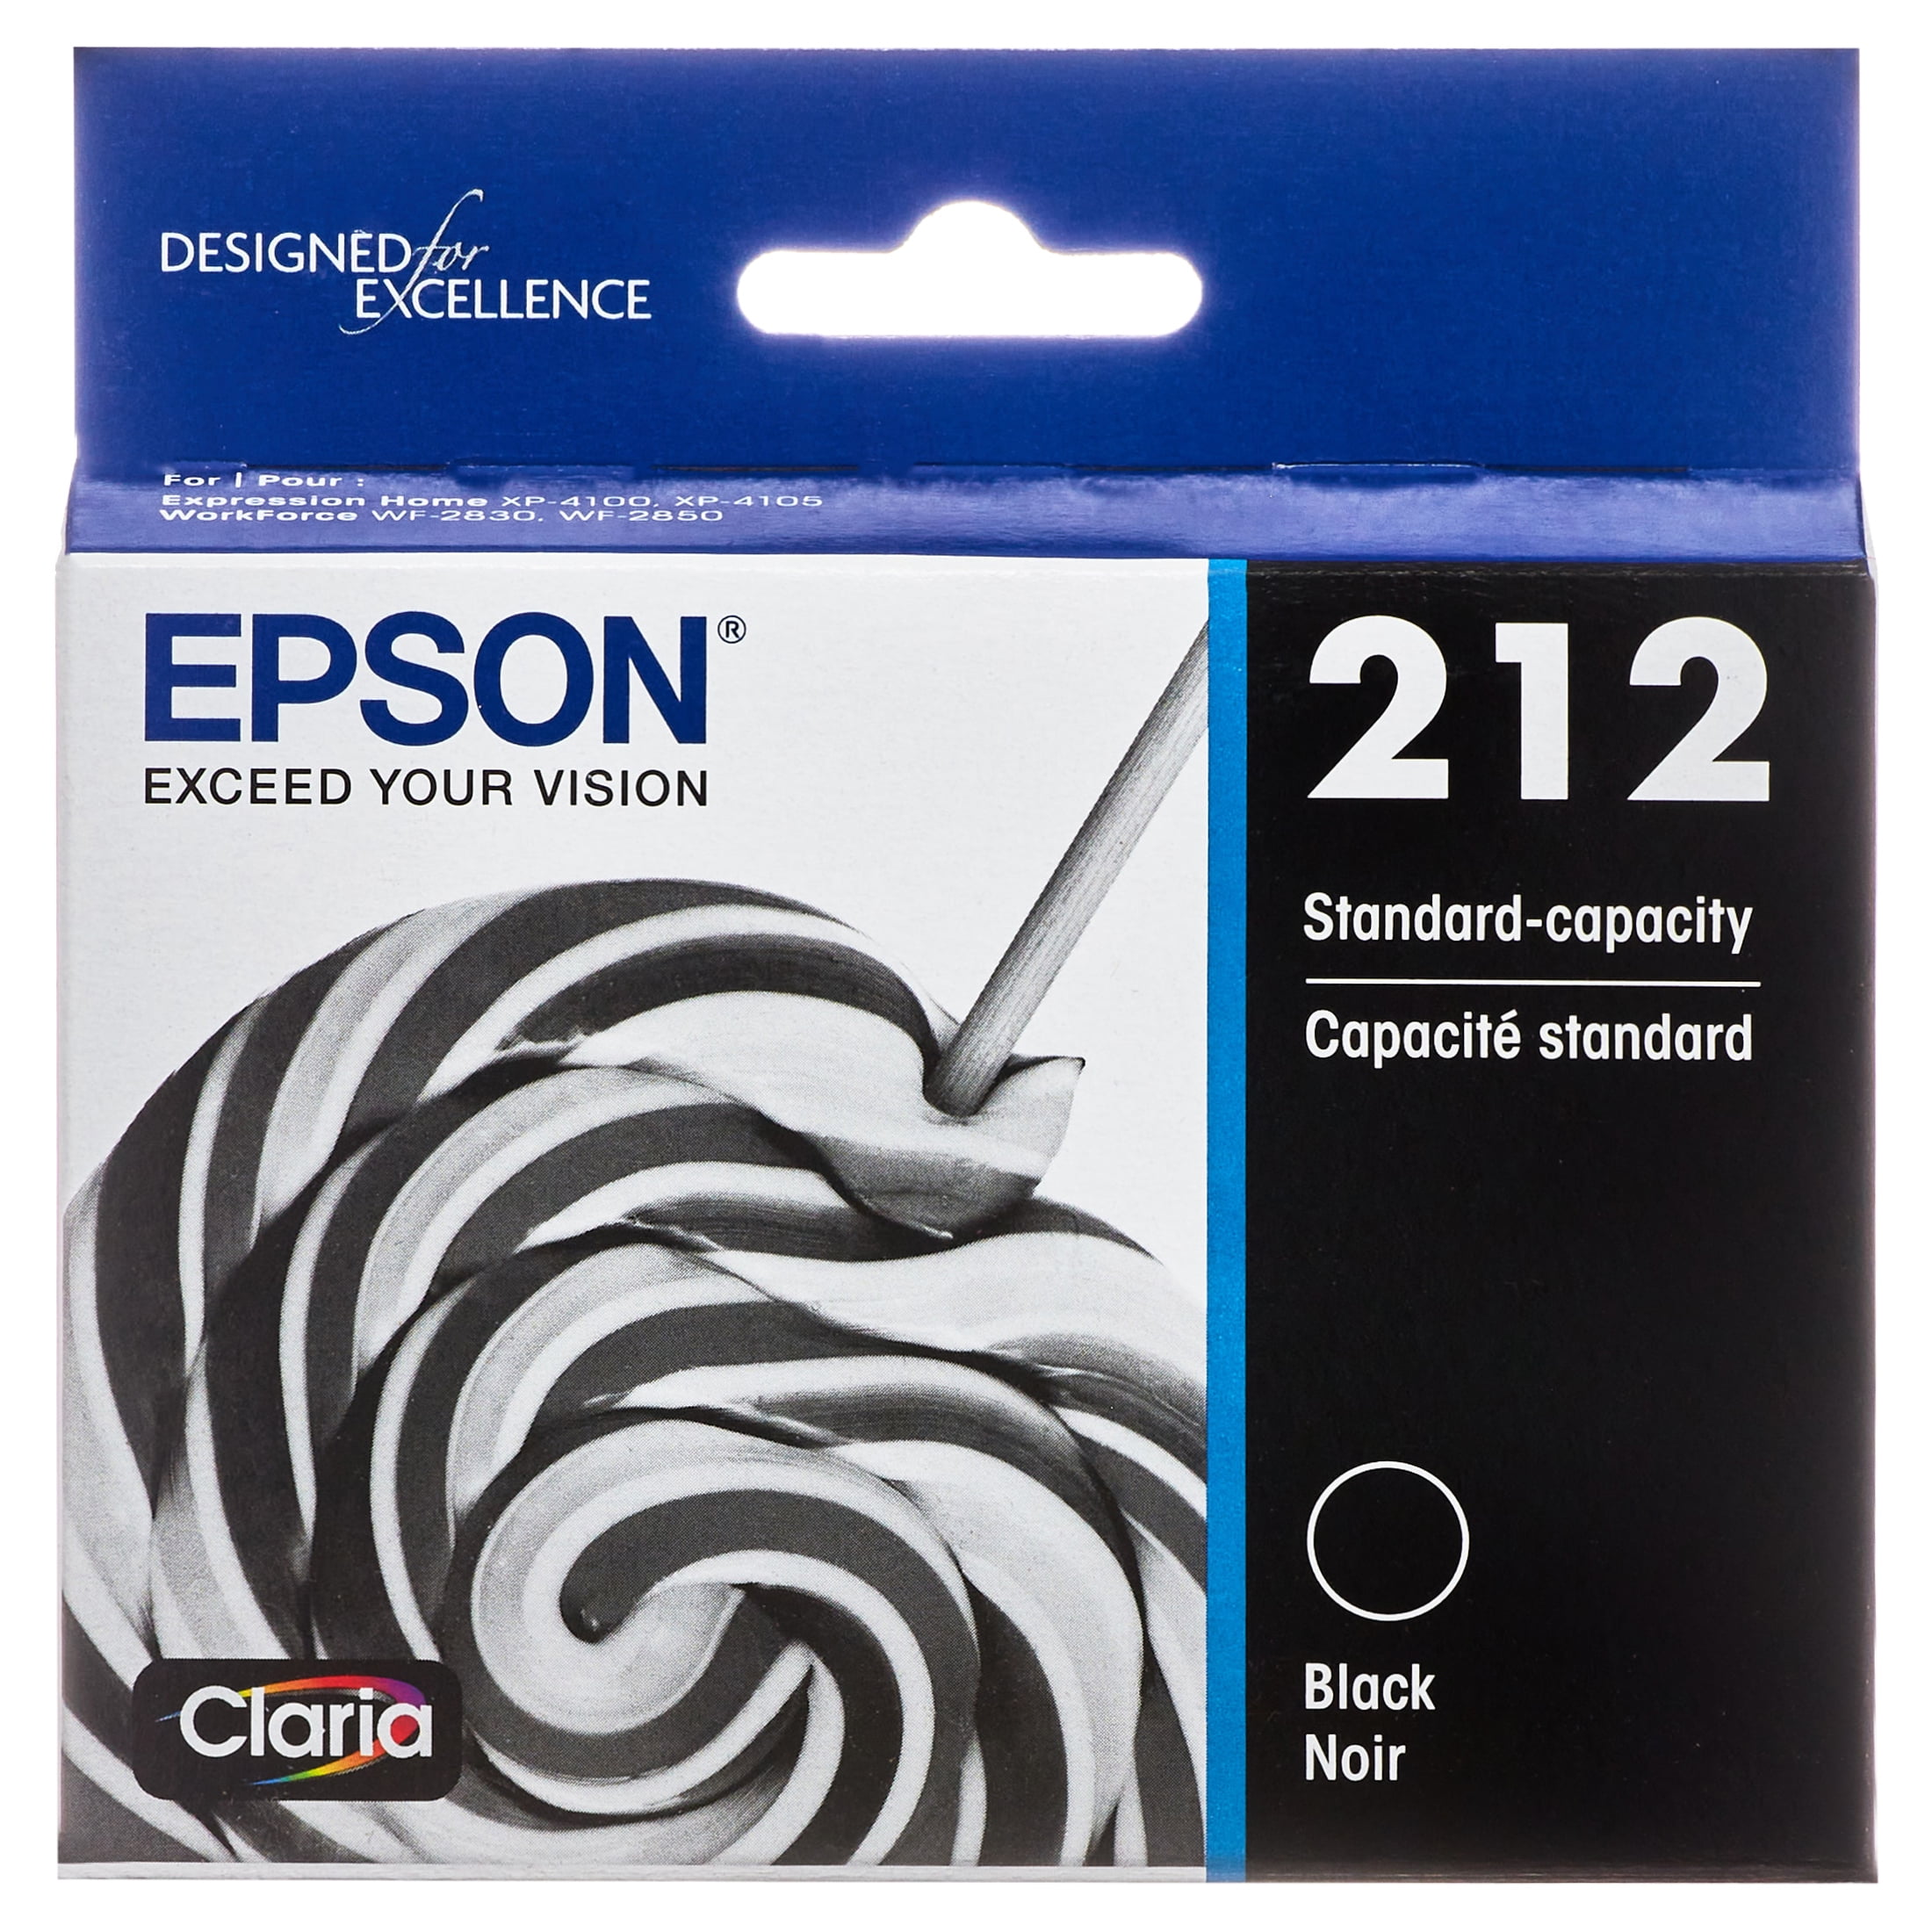 EPSON 212 Claria Ink Standard Capacity Black Cartridge (T212120-S) Works  with WorkForce WF-2830, WF-2850, Expression XP-4100, XP-4105